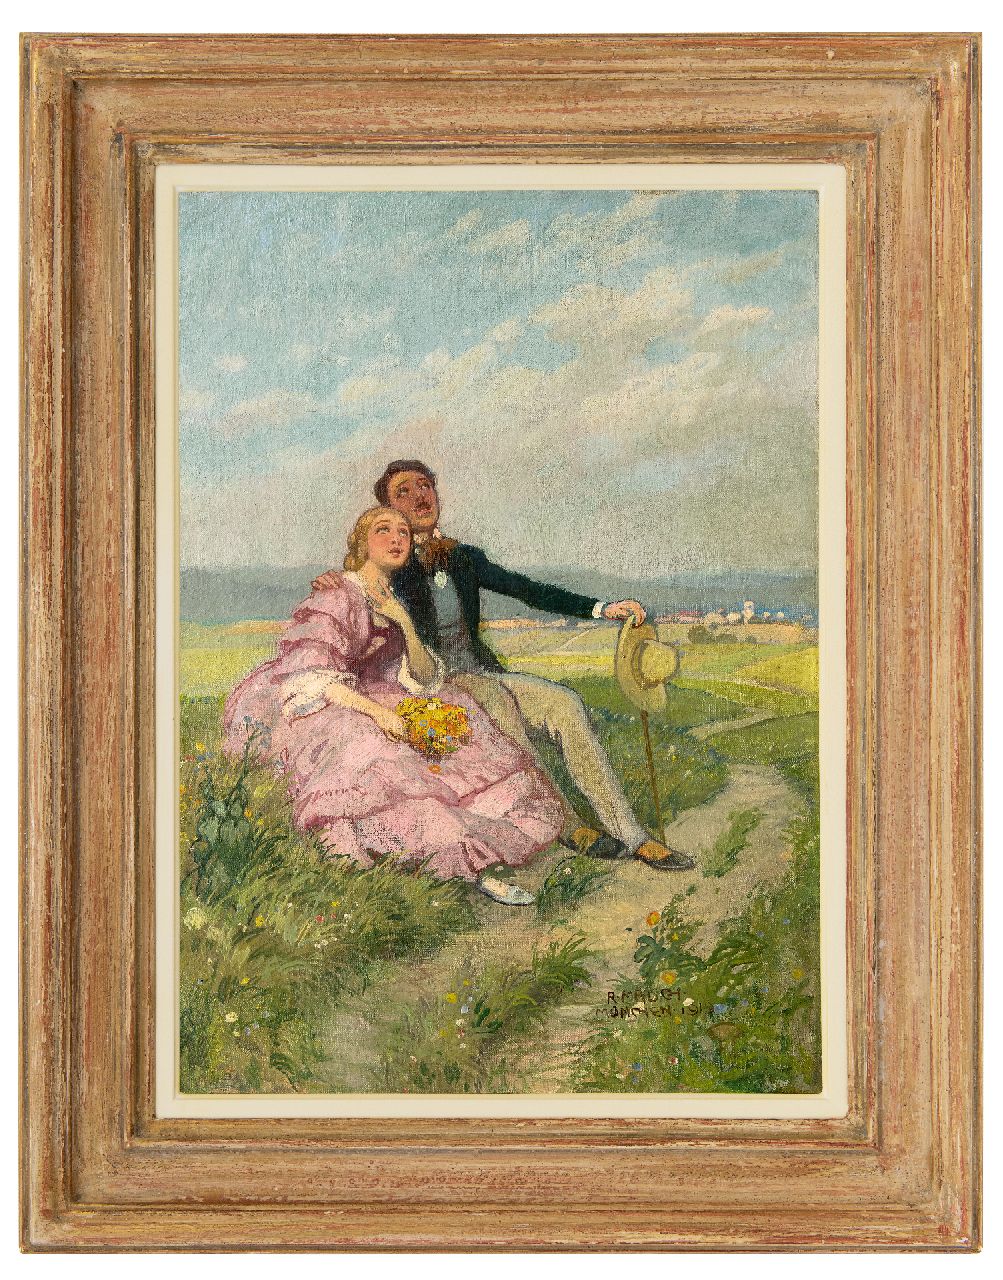 Mauch R.  | Richard Mauch | Paintings offered for sale | Romantic Sunday afternoon, oil on canvas 50.8 x 36.5 cm, signed l.r. and dated 'München 1919'